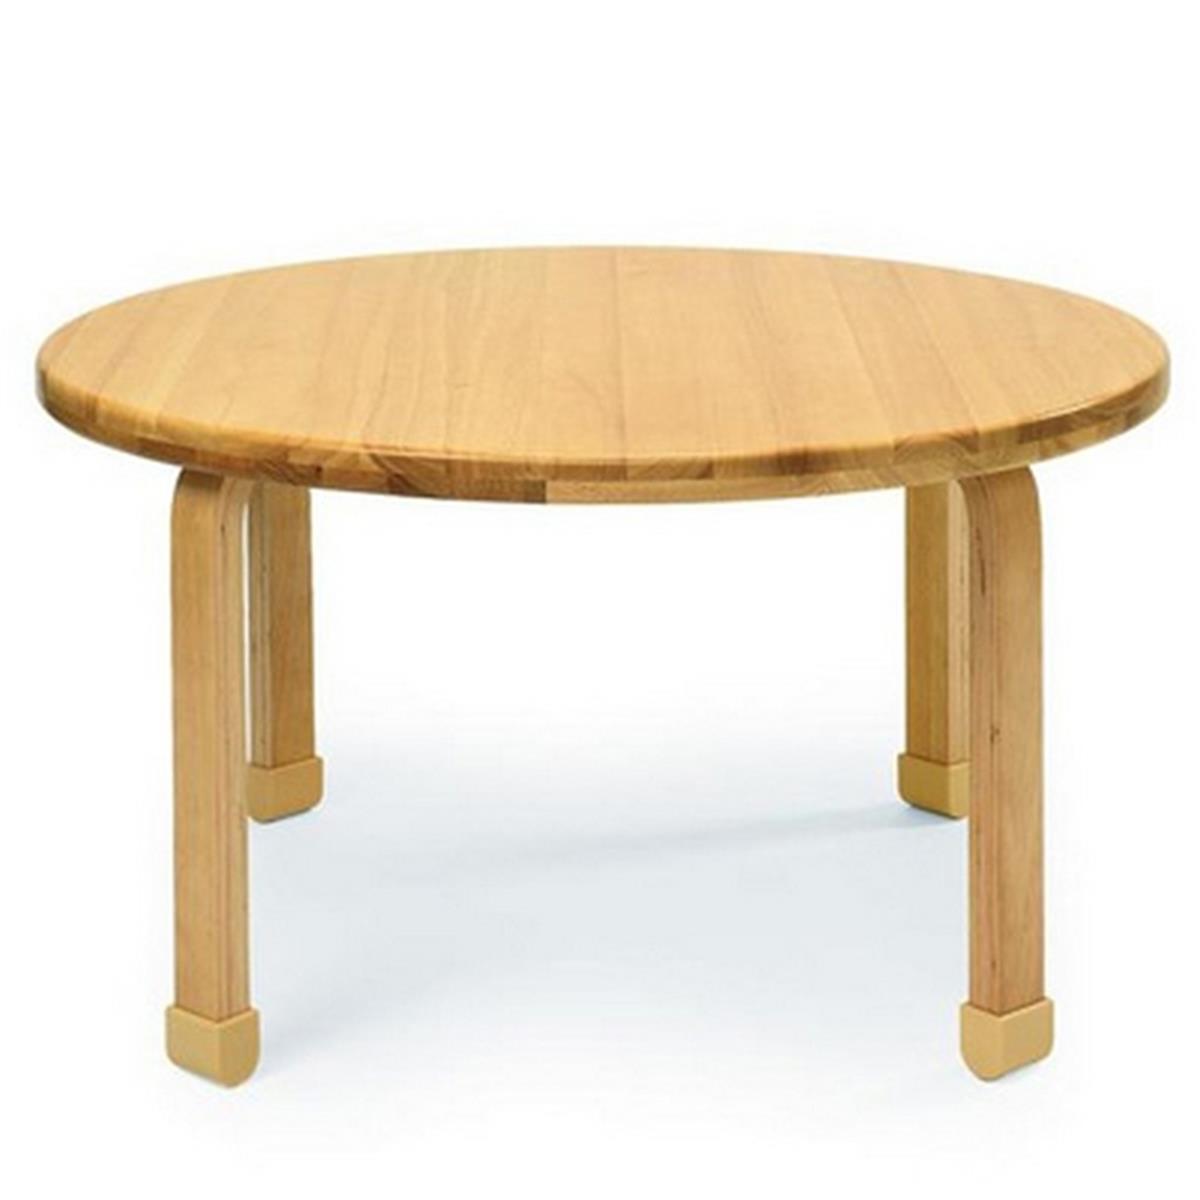 Angeles Ab7820l18 36 In. Dia. Round Natural Wood Table With 18 In. Legs